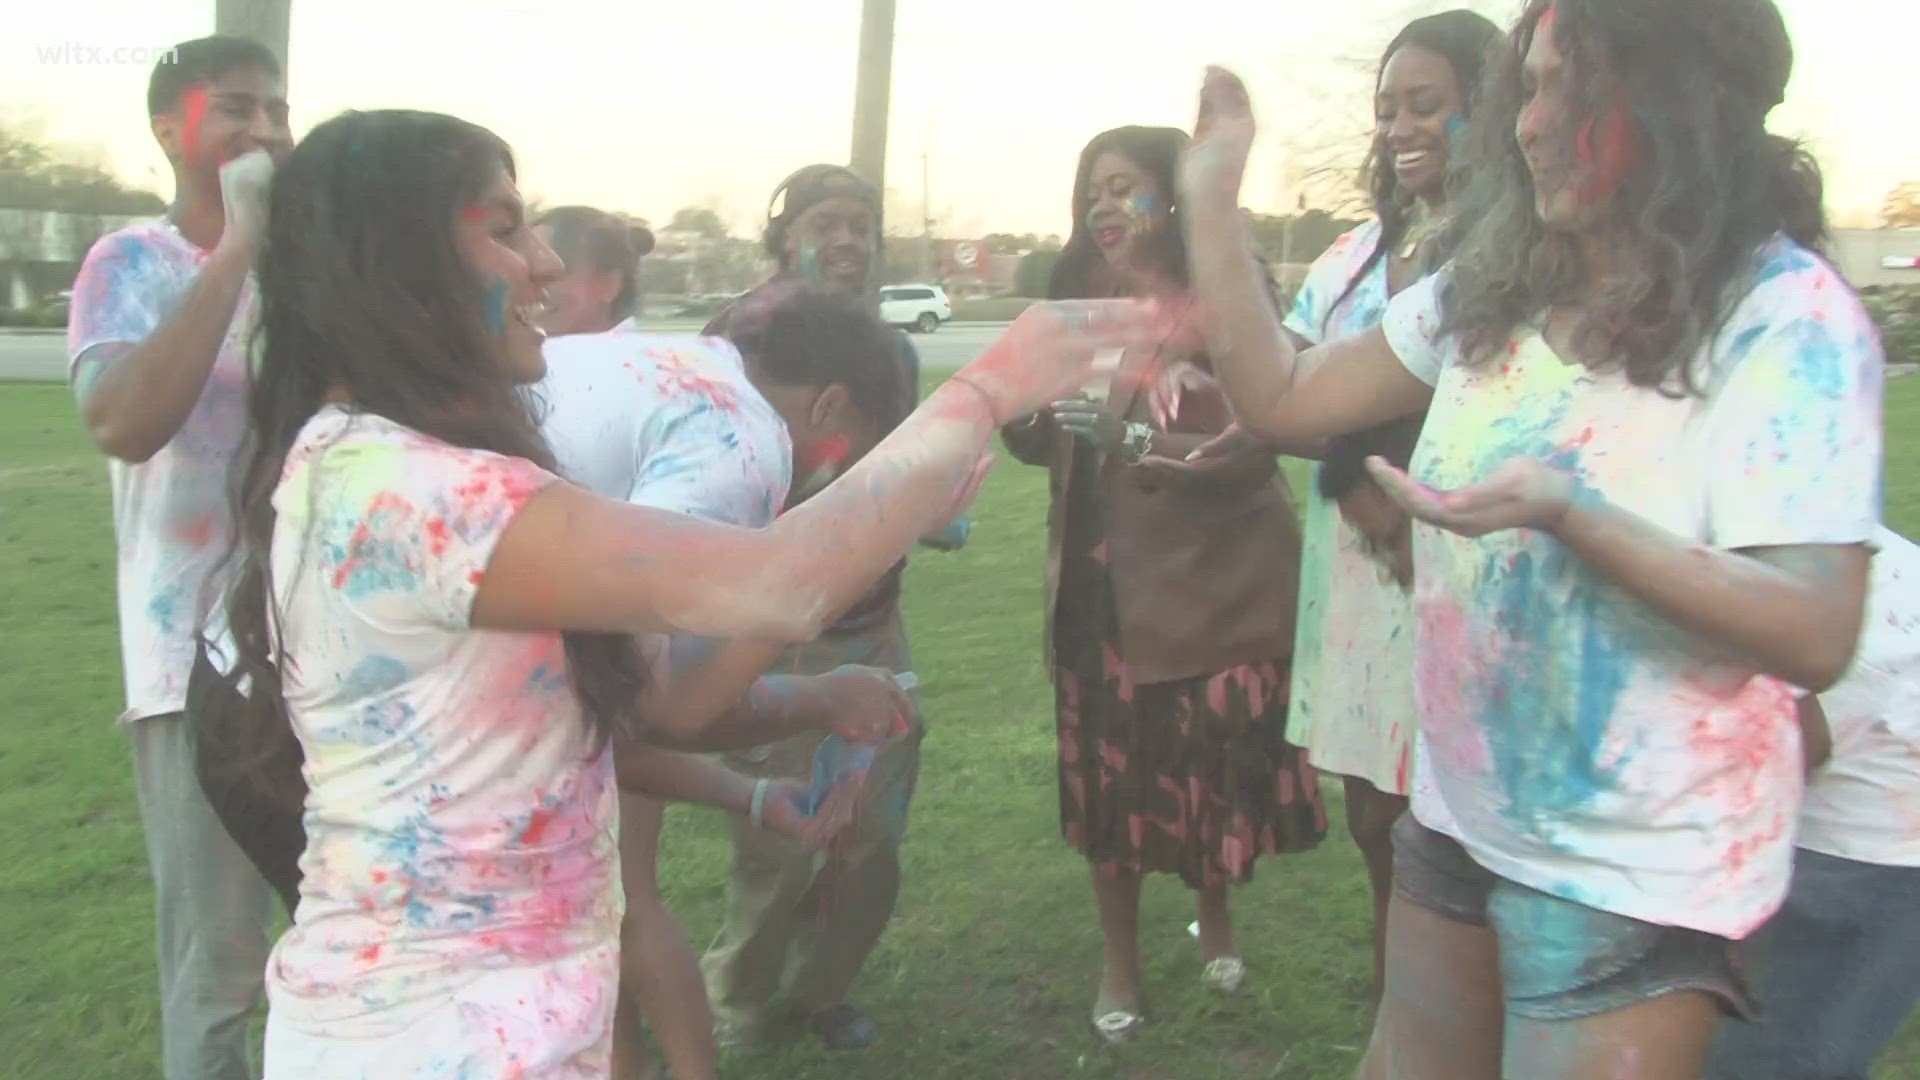 News19's Whitney Sullivan is joined by City of Columbia Councilwoman Aditi Bussells to discuss some of the traditions and meanings of the Holi holiday.